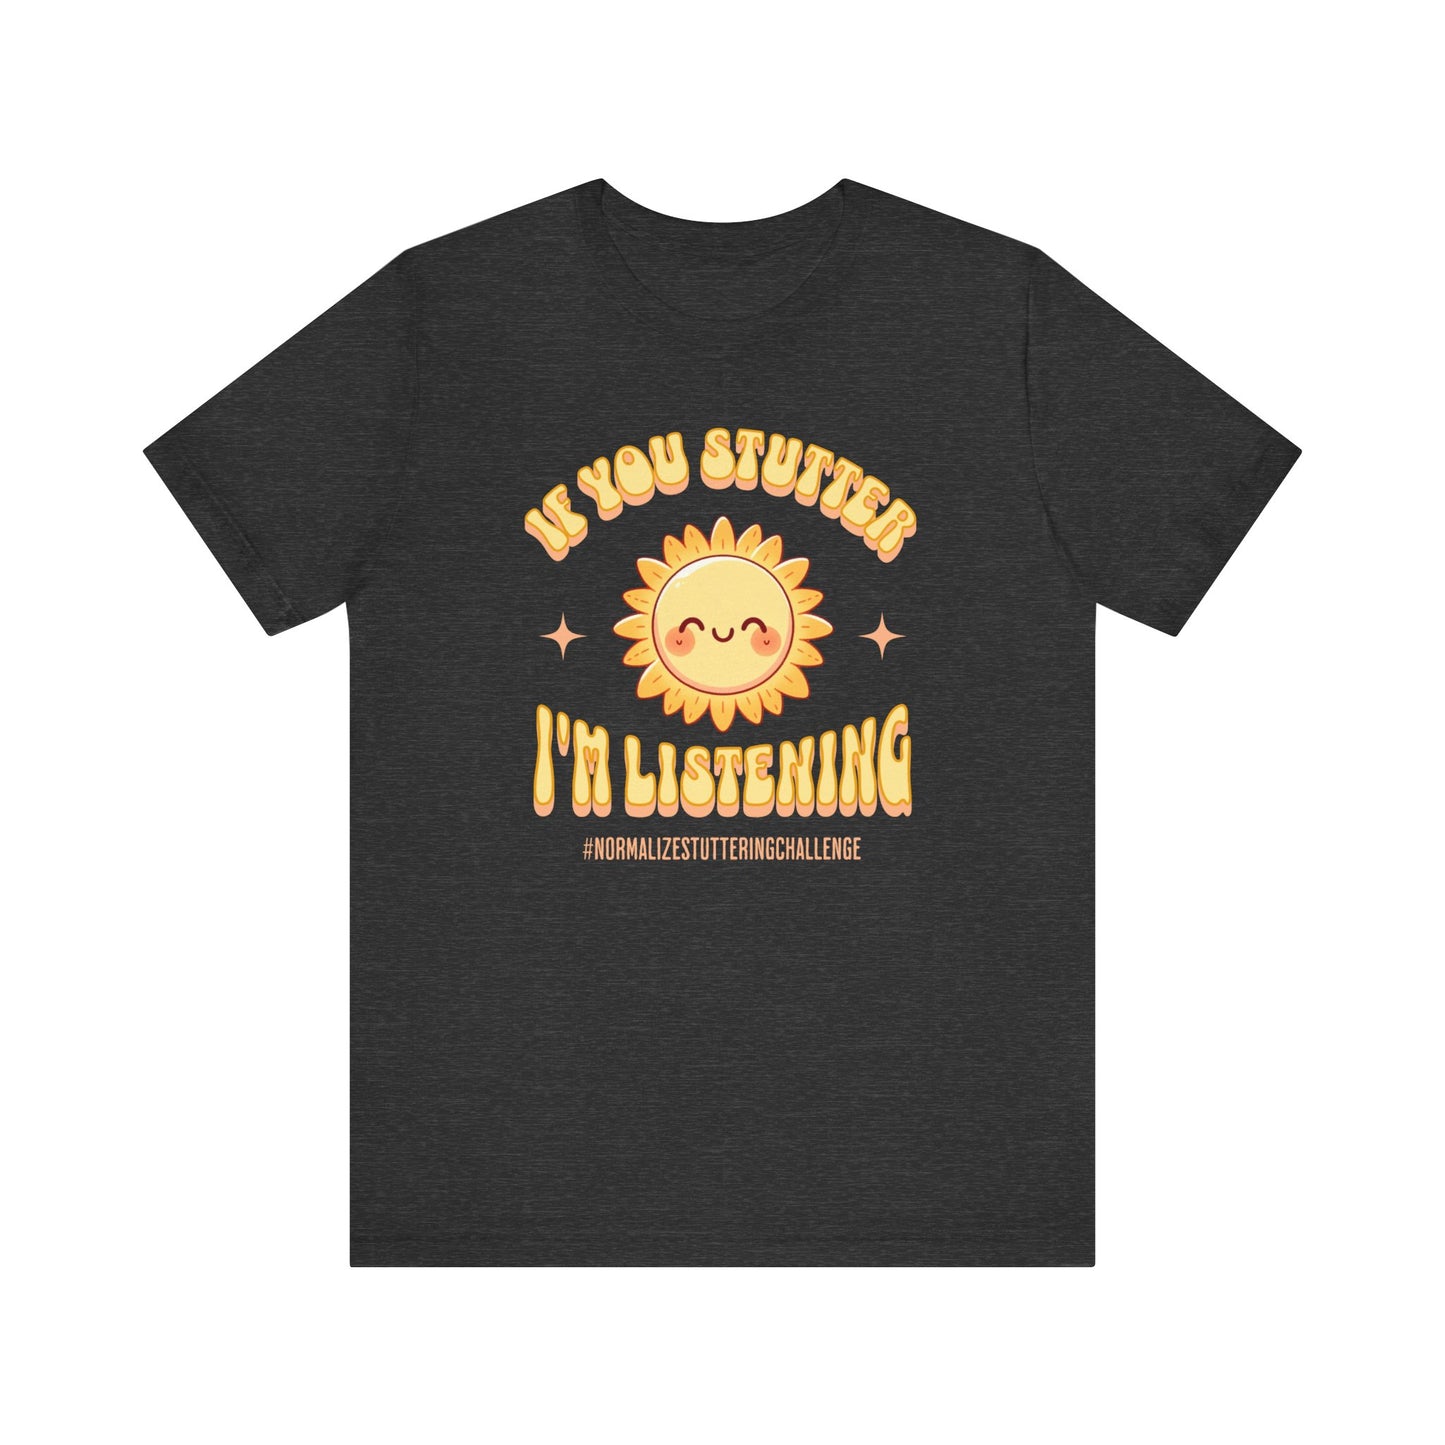 Normalize Stuttering Challenge If You Stutter I'm Listening T-shirt